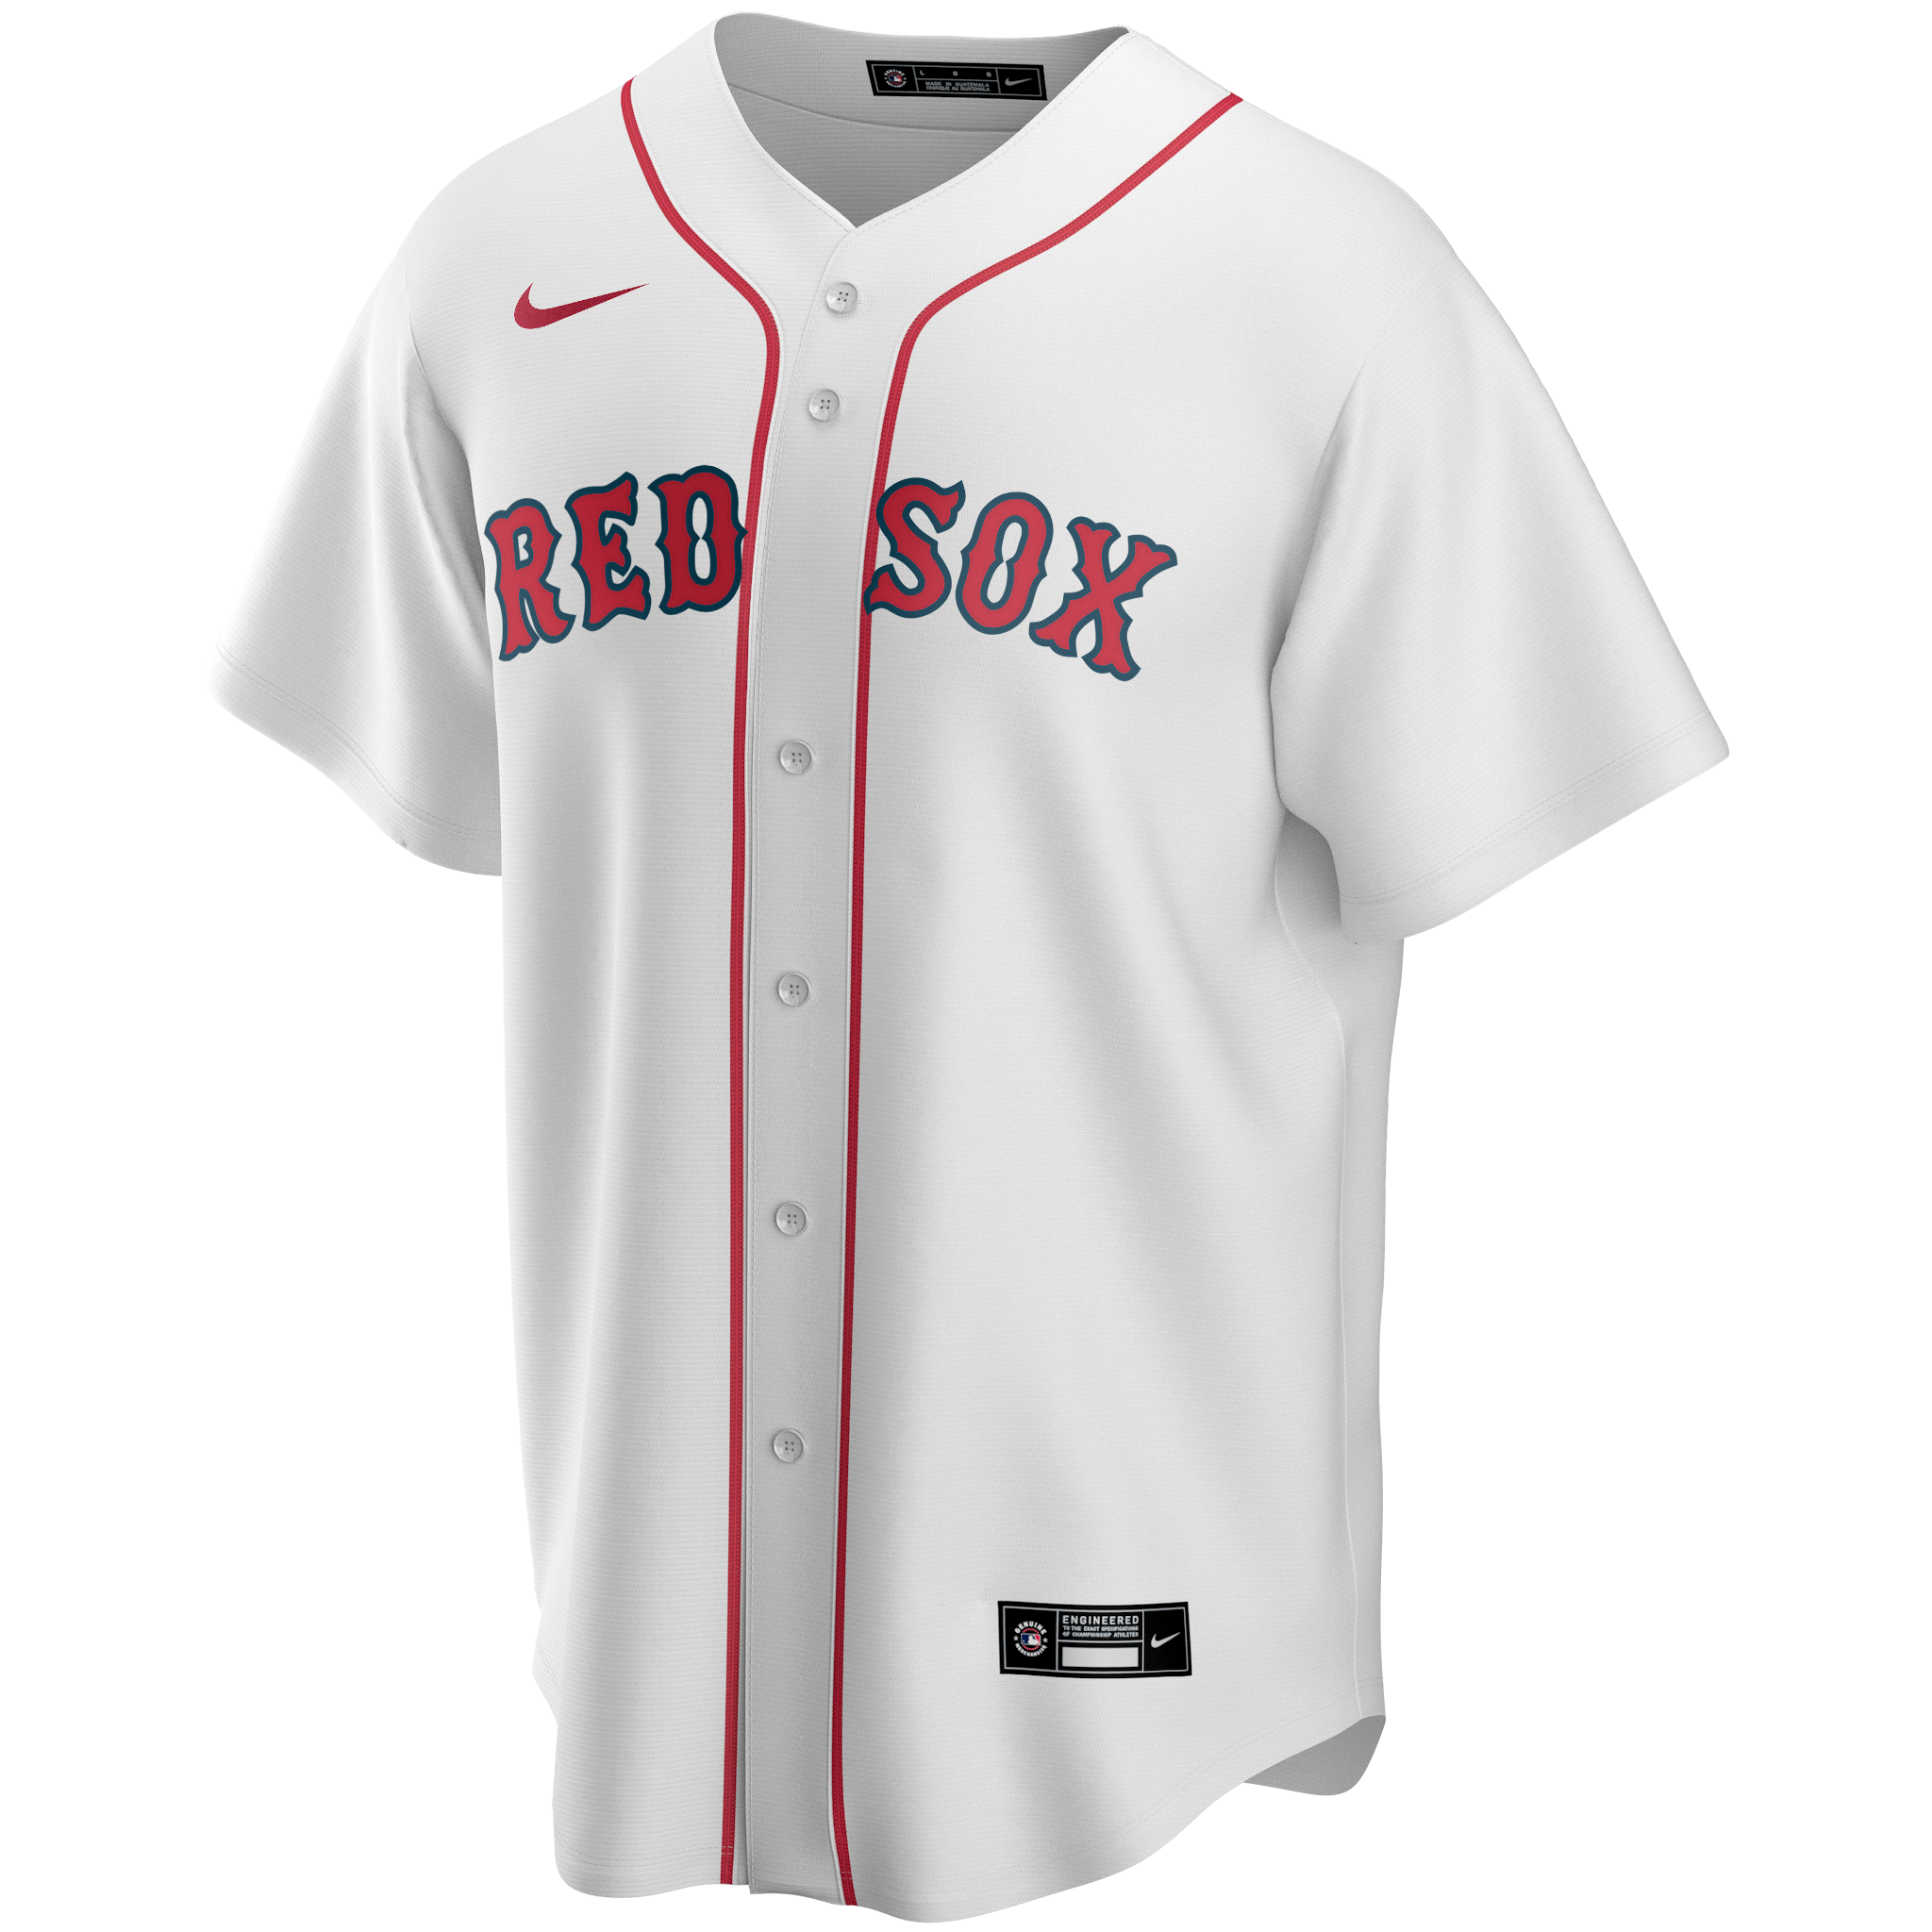 Chris Sale Red Sox Jersey For Babies, Youth, Women, or Men